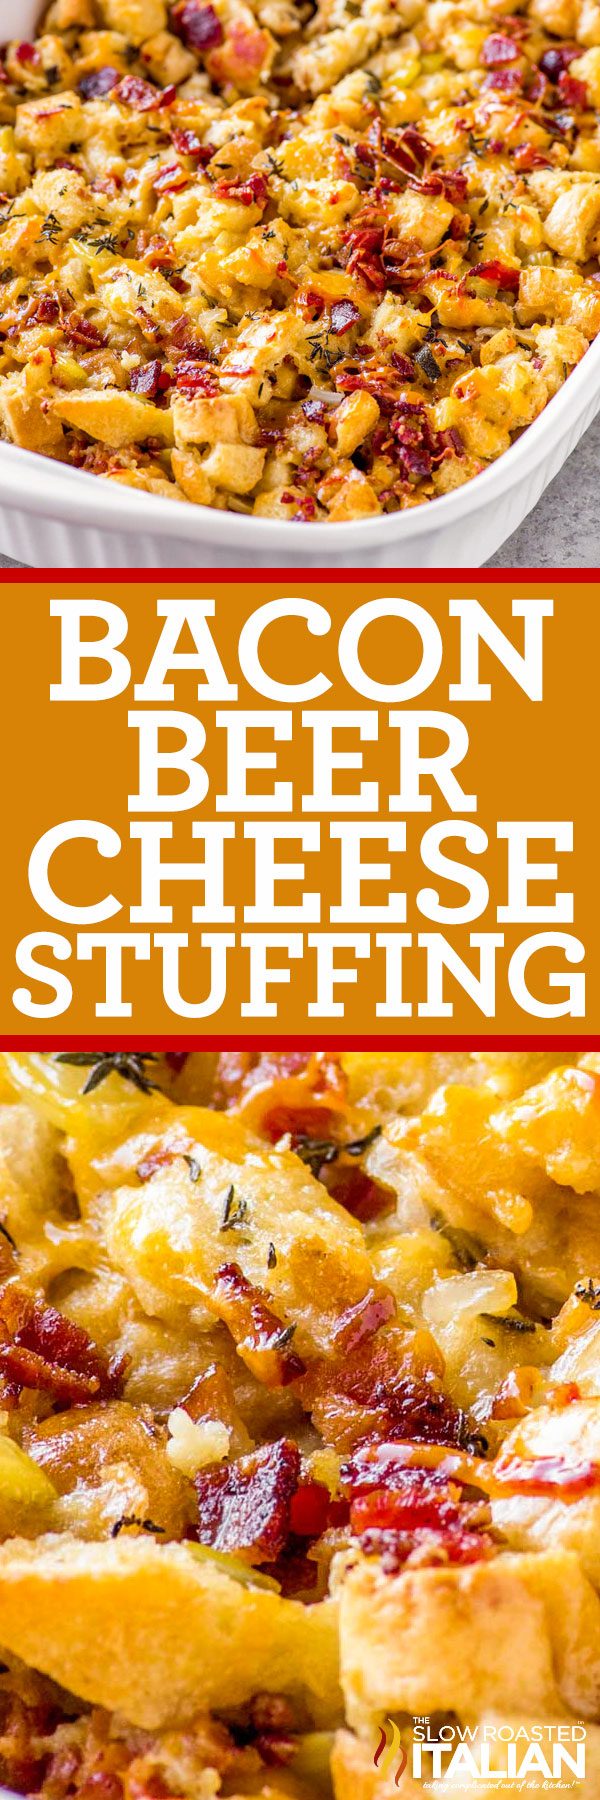 titled image for bacon stuffing casserole recipe